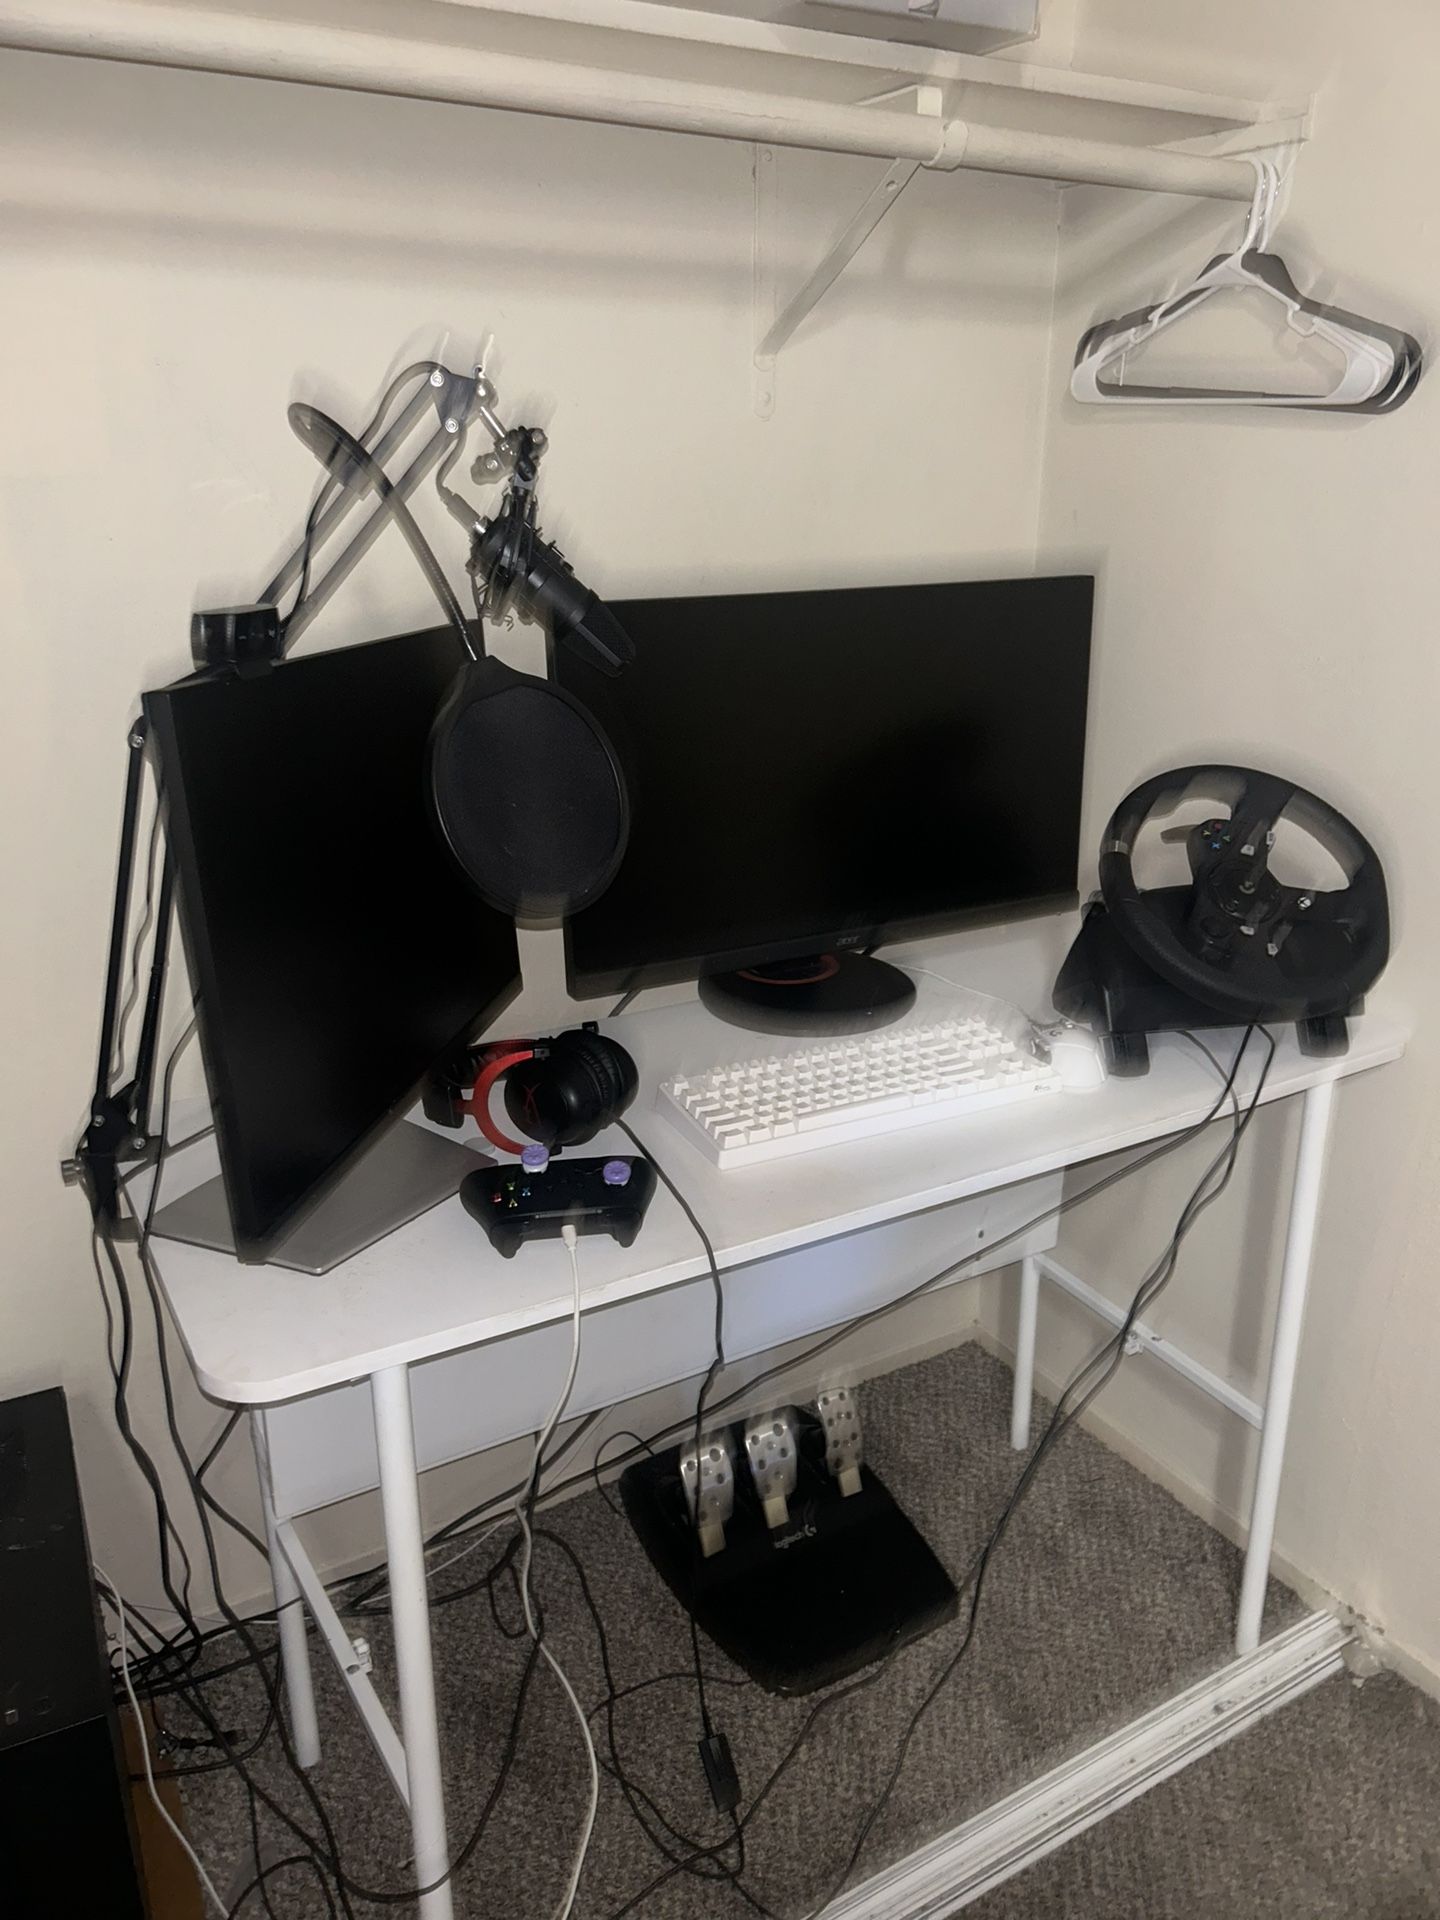 GAMING SETUP + PC (ALL INCLUDED)